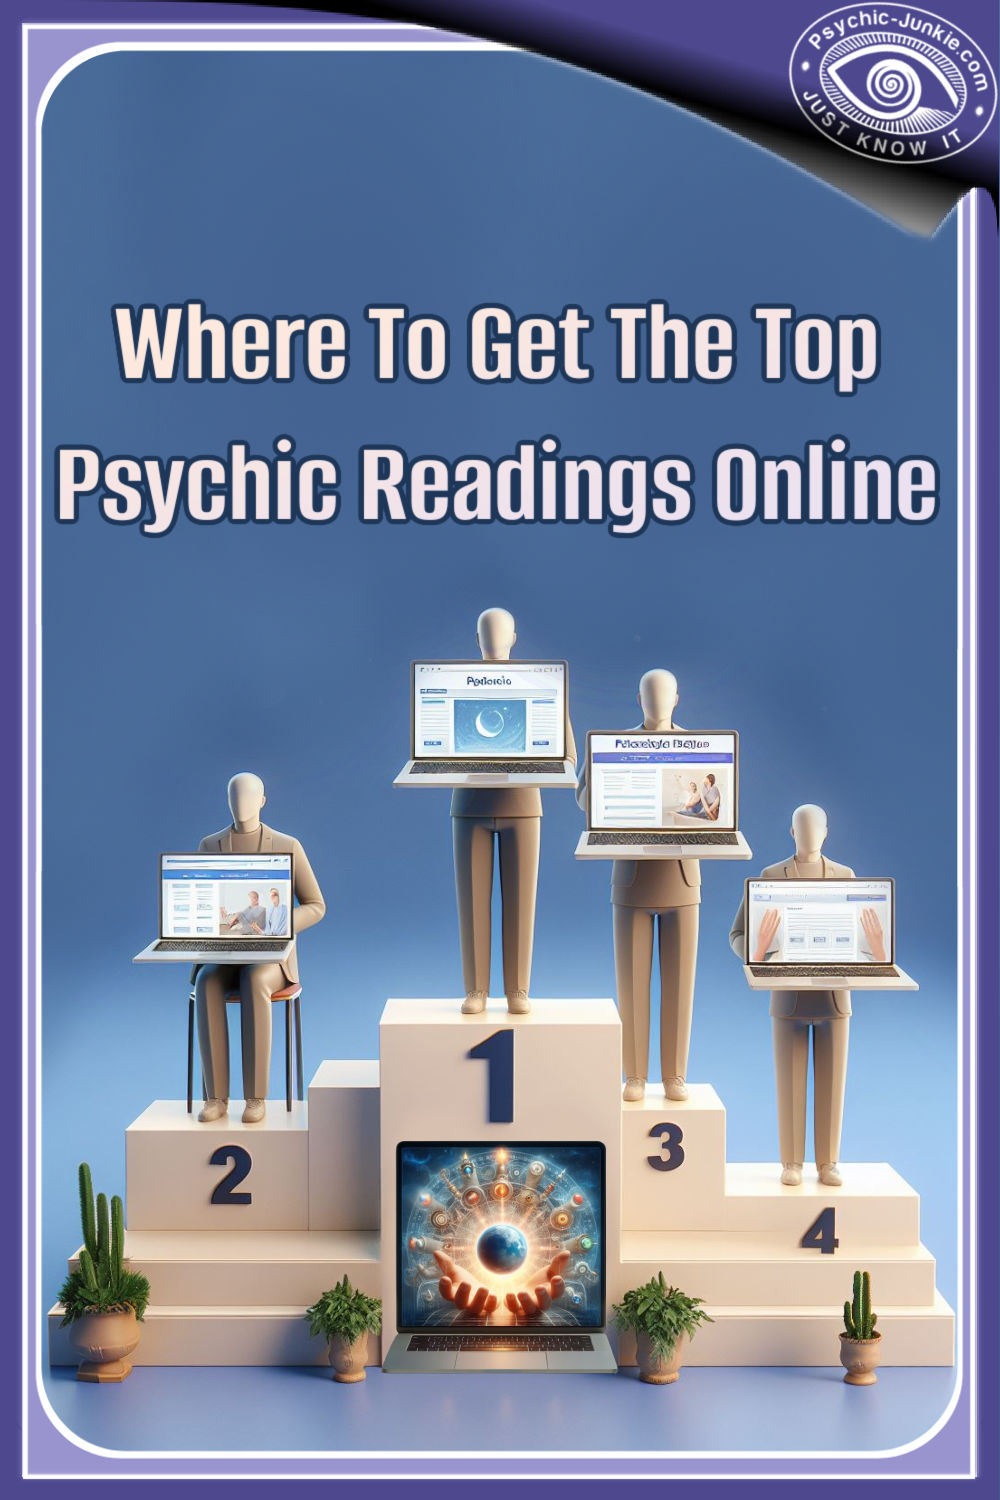 Great advice from the top 10 psychic readings websites